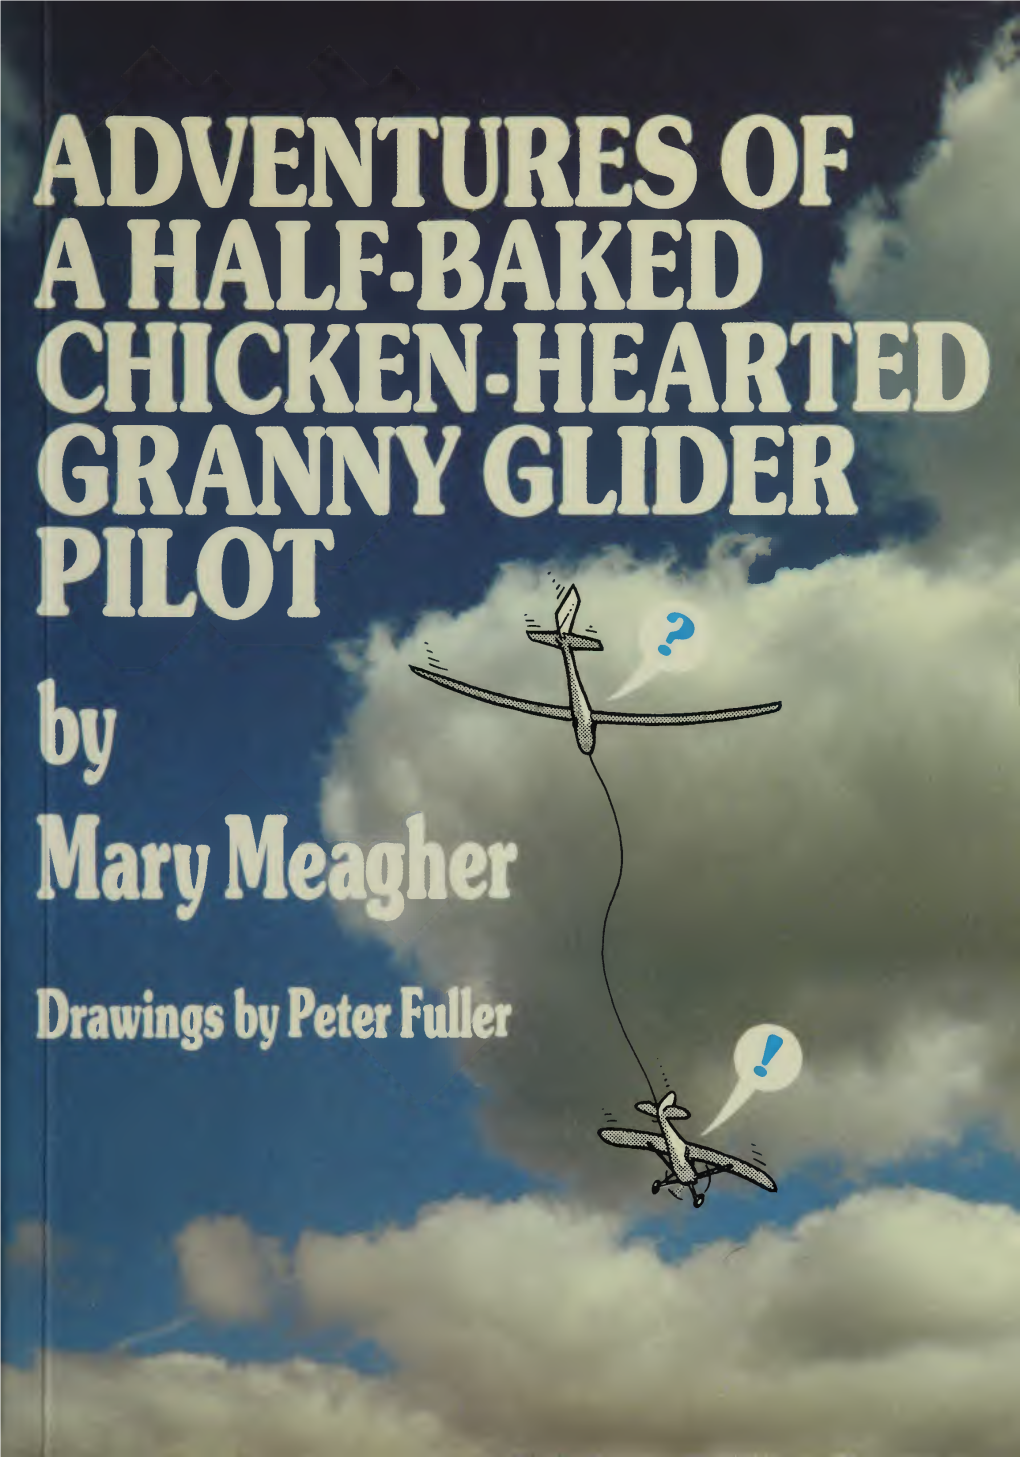 Adventures of a Half-Baked Chicken Hearted Granny Glider Pilot